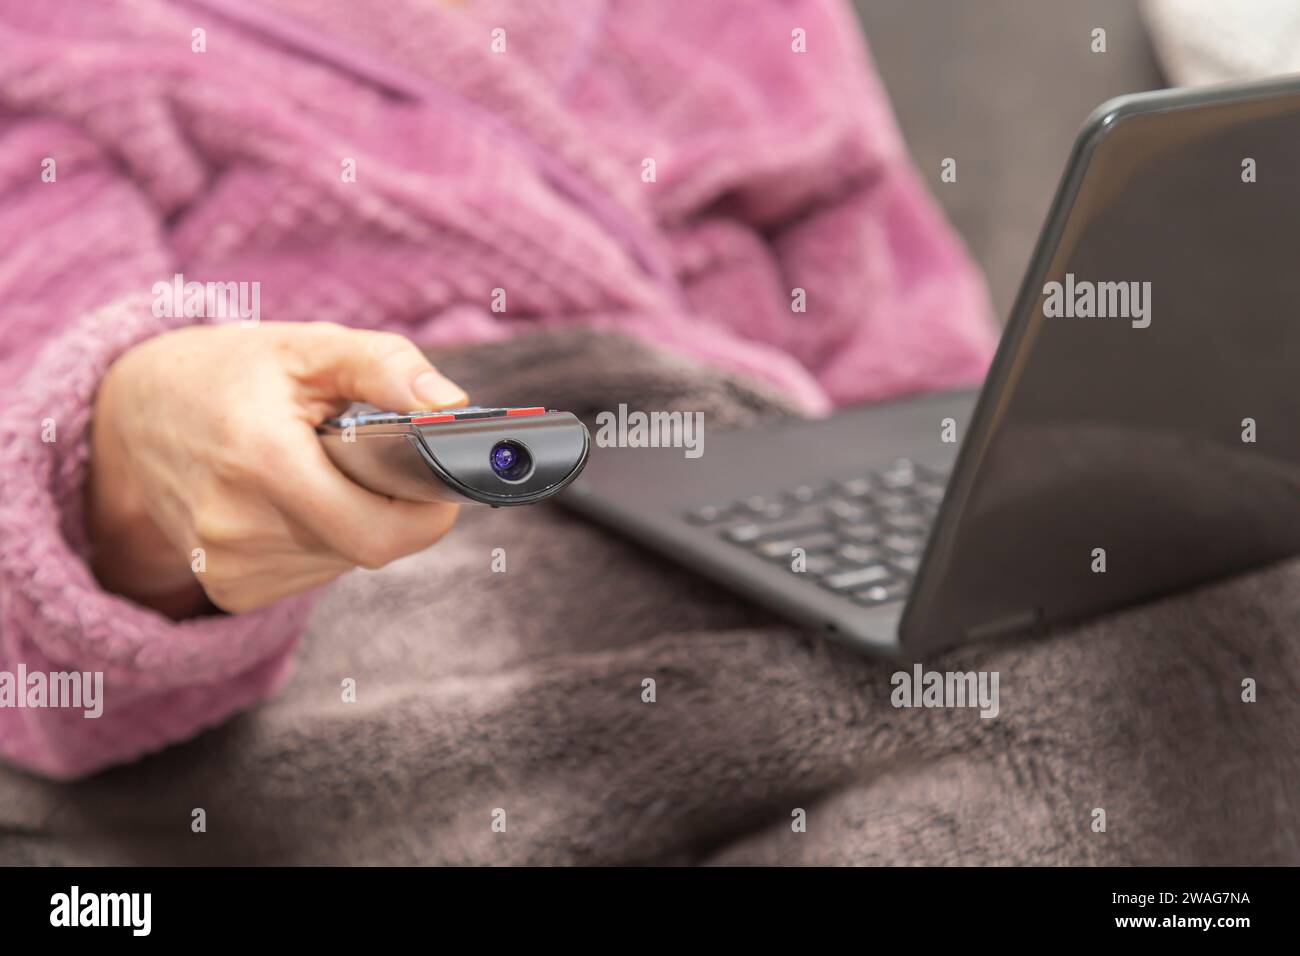 A woman sits on the sofa at home with a TV remote control in her hand and a laptop on her lap. Stock Photo